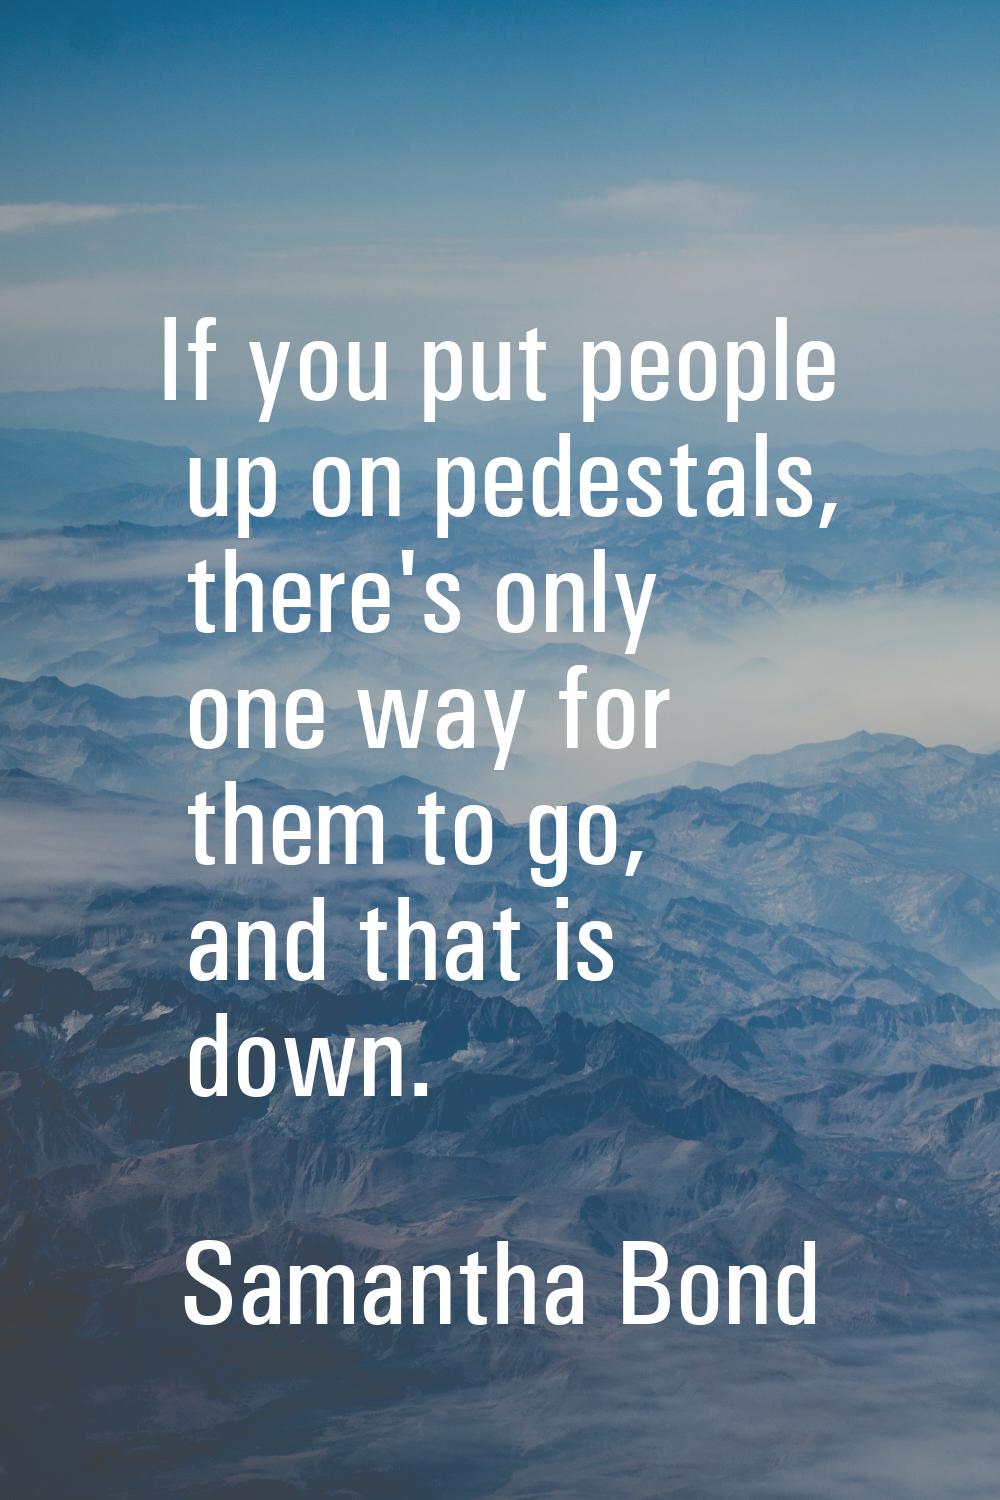 If you put people up on pedestals, there's only one way for them to go, and that is down.